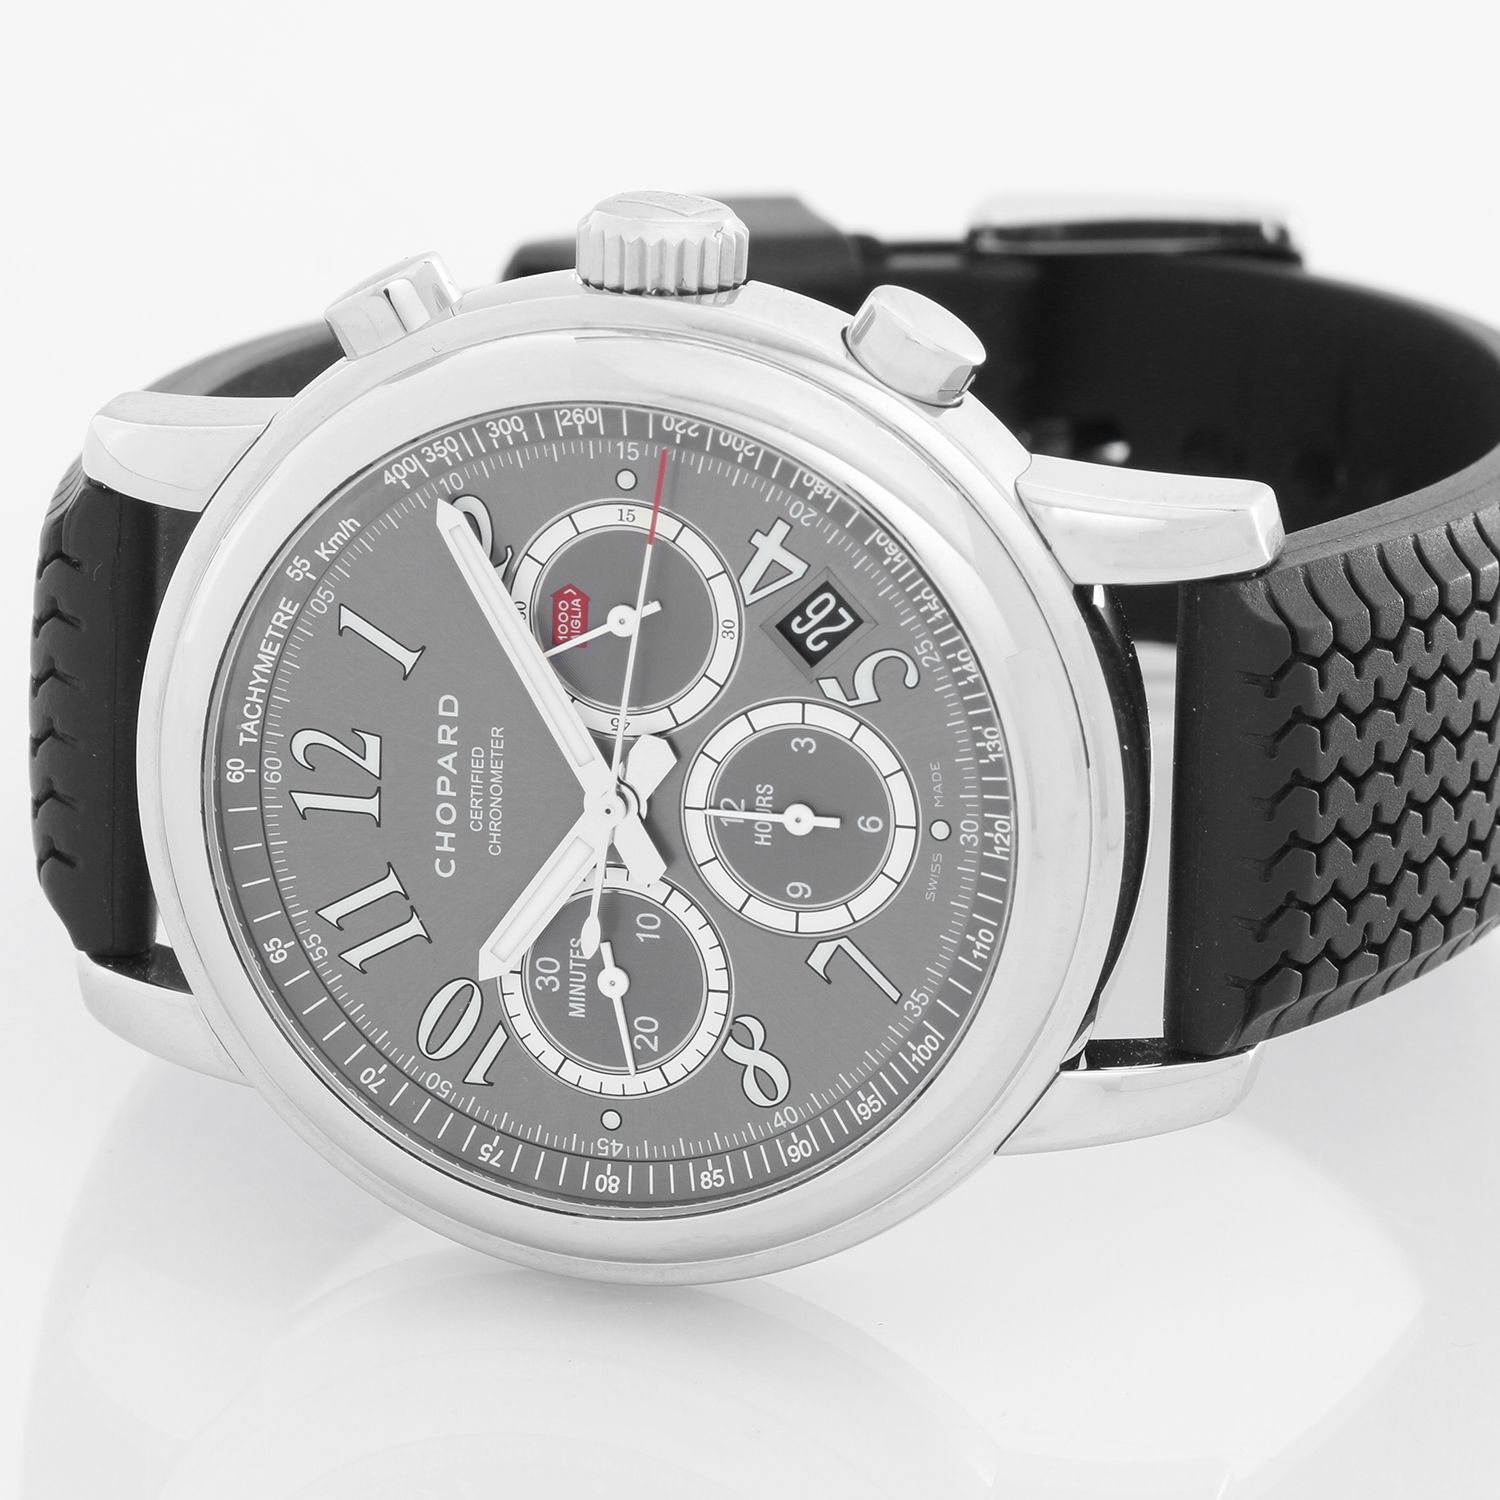 Chopard Mille Miglia. 8511 for $2,280 for sale from a Private